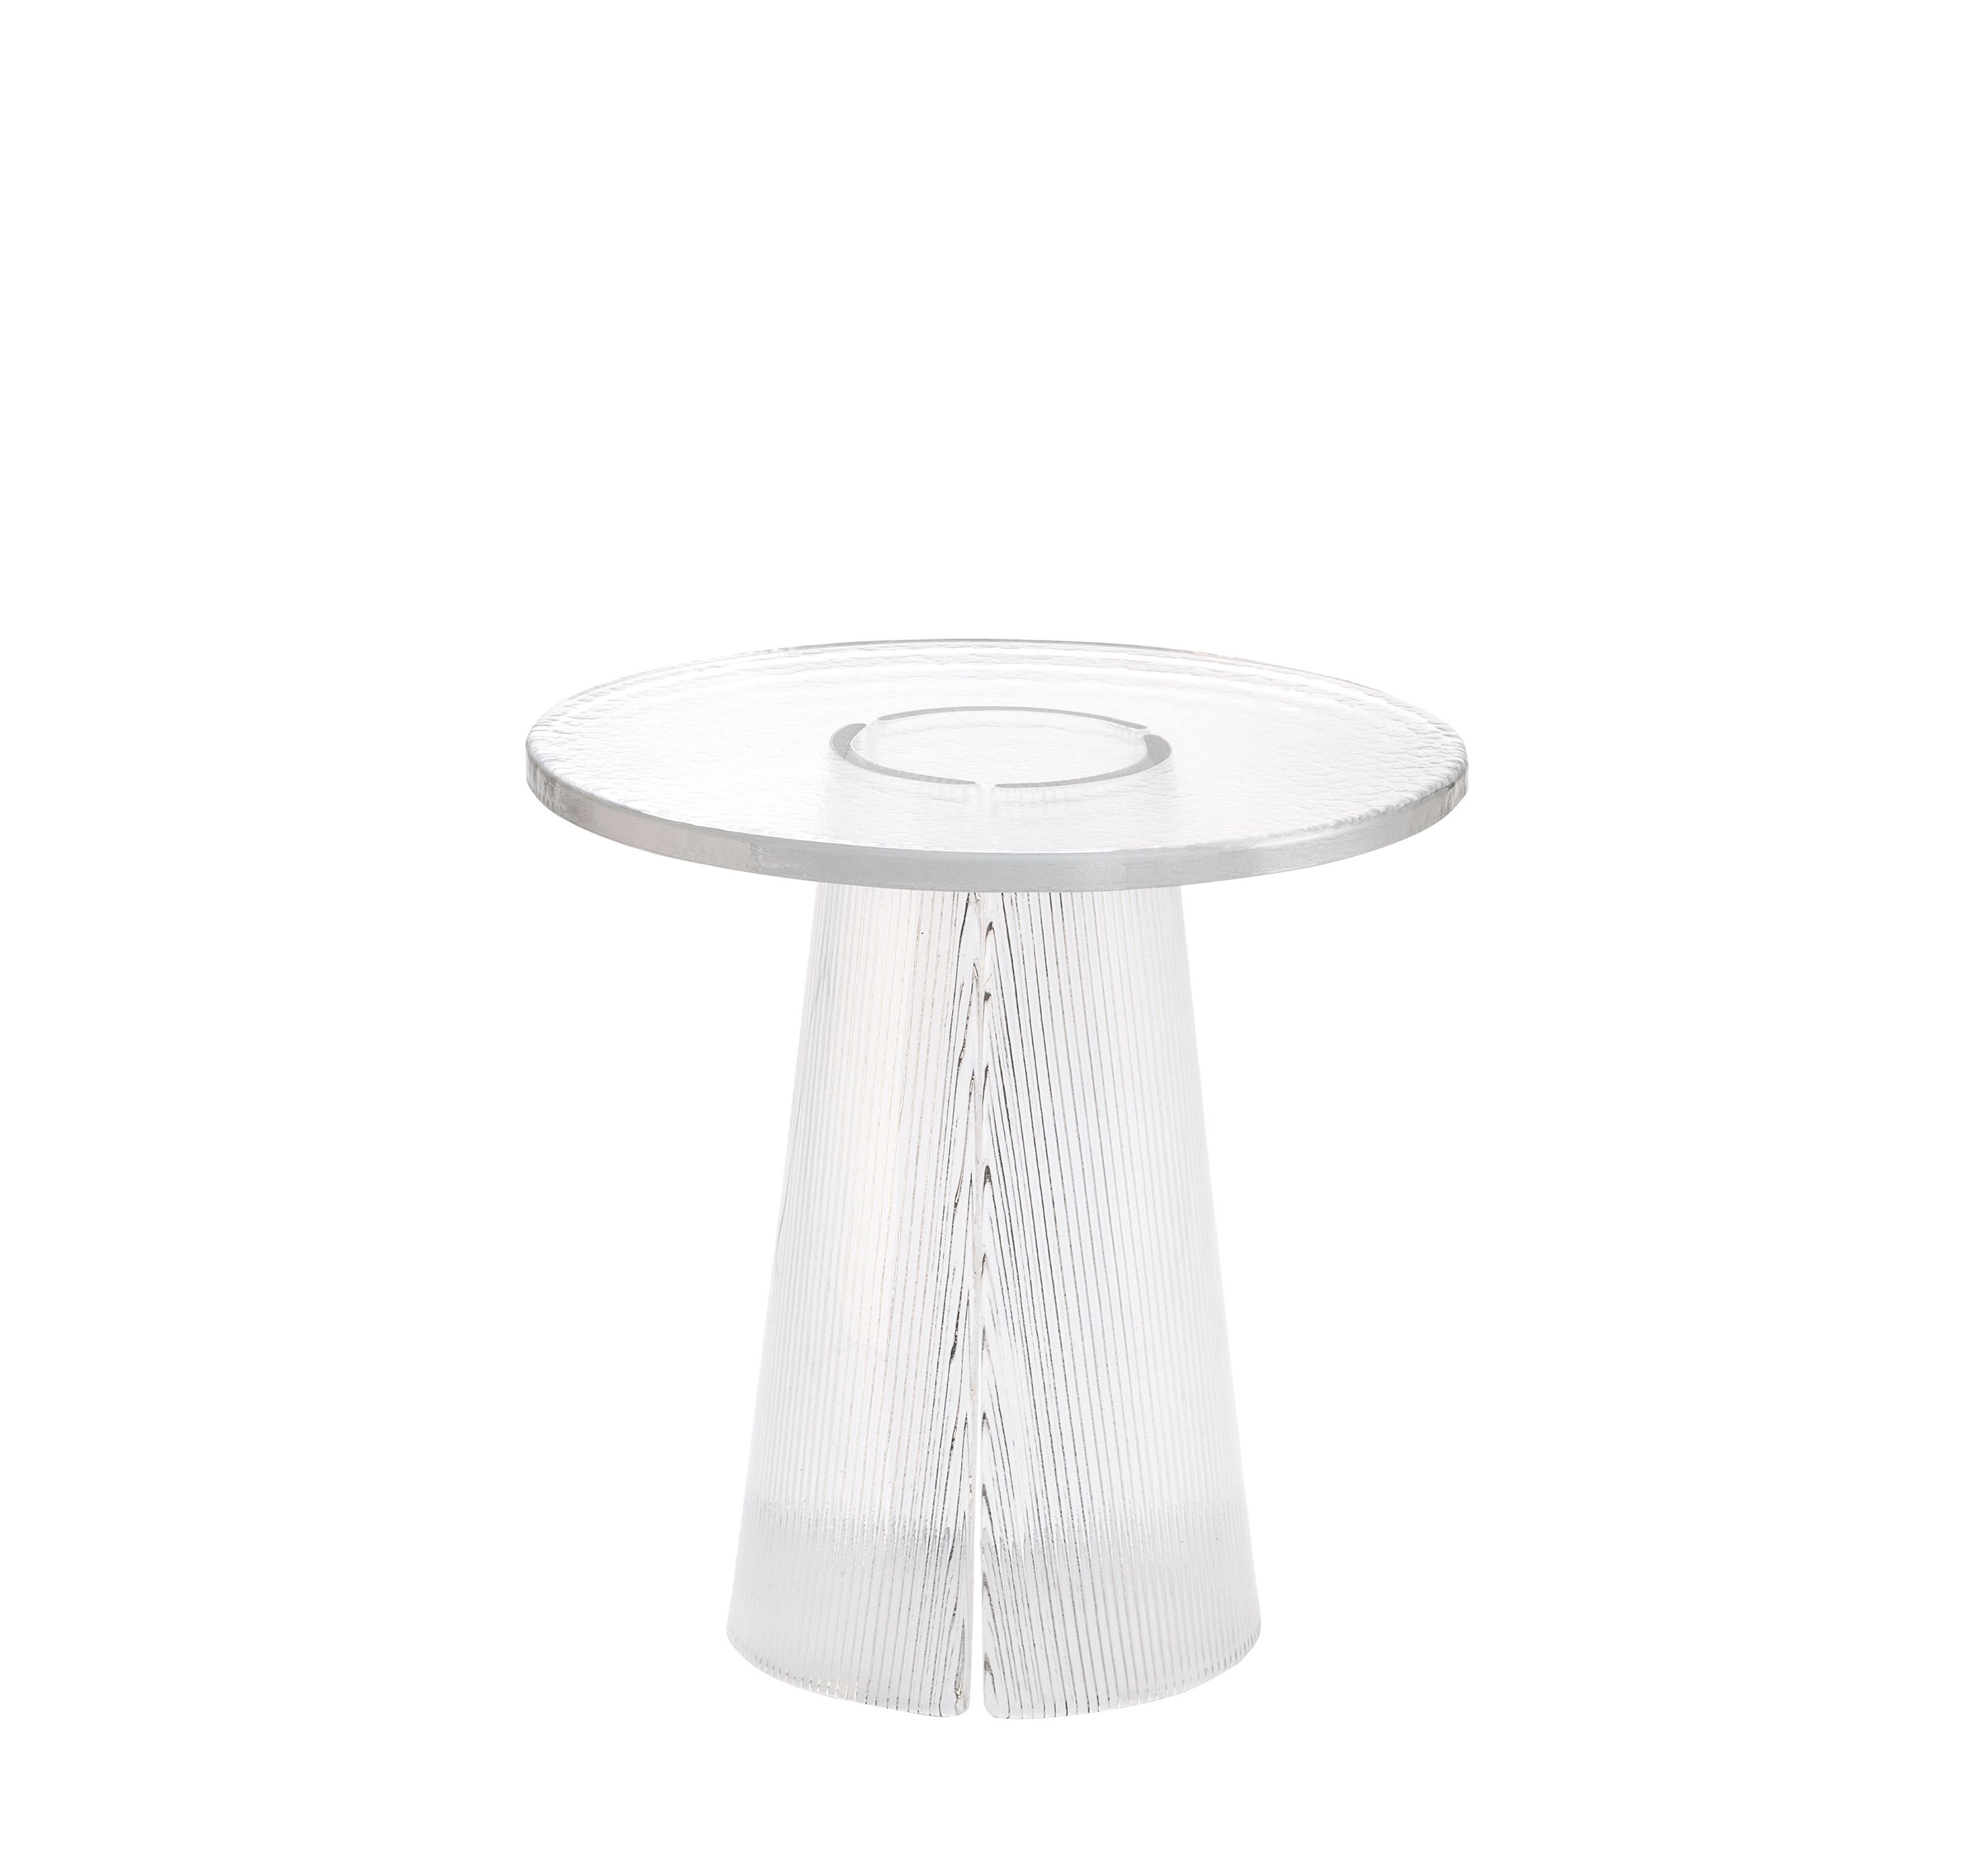 Bent side table high transparent by Pulpo
Dimensions: D50 x H51.5 cm
Materials: casted glass

Also available in different finishes and dimensions. 

The bubbled surface of the cast glass table top dances against with the smooth lines of the